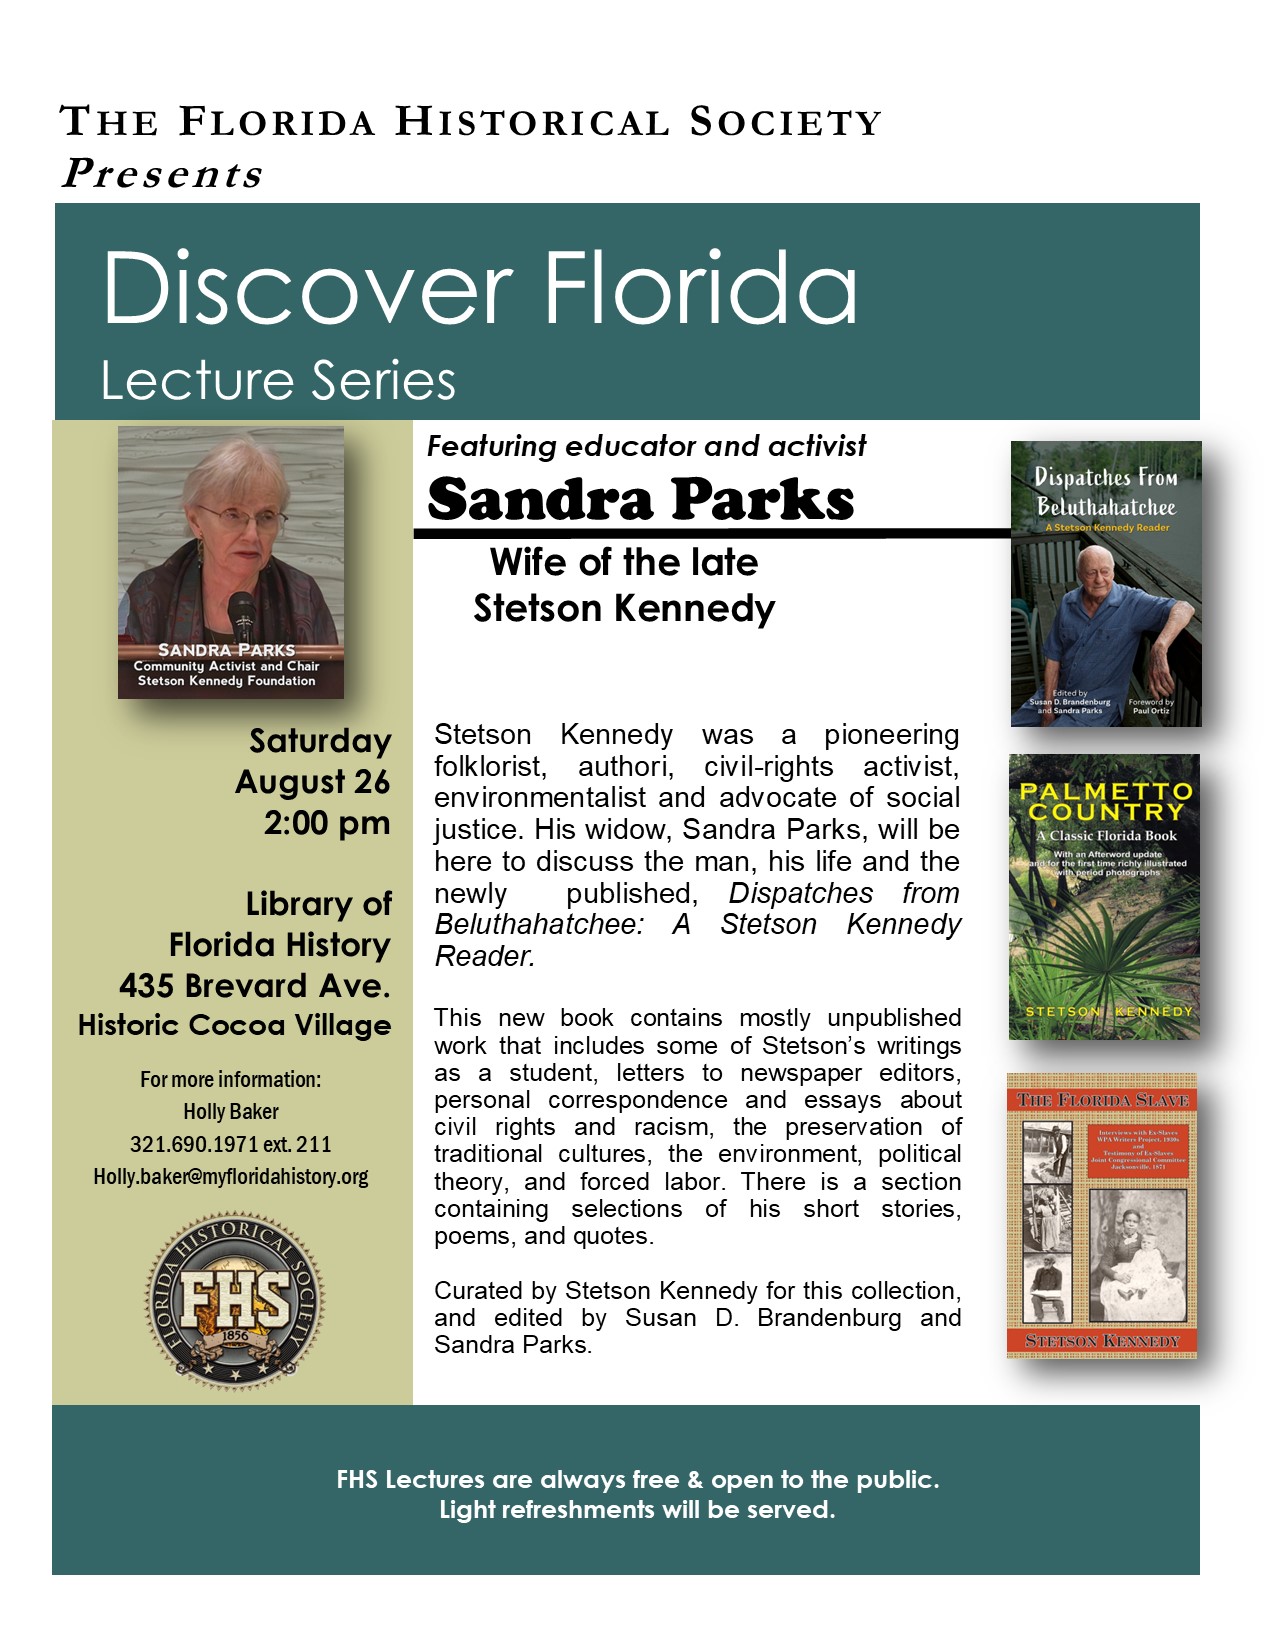 Discover Florida Lecture Series - Sandra Parks